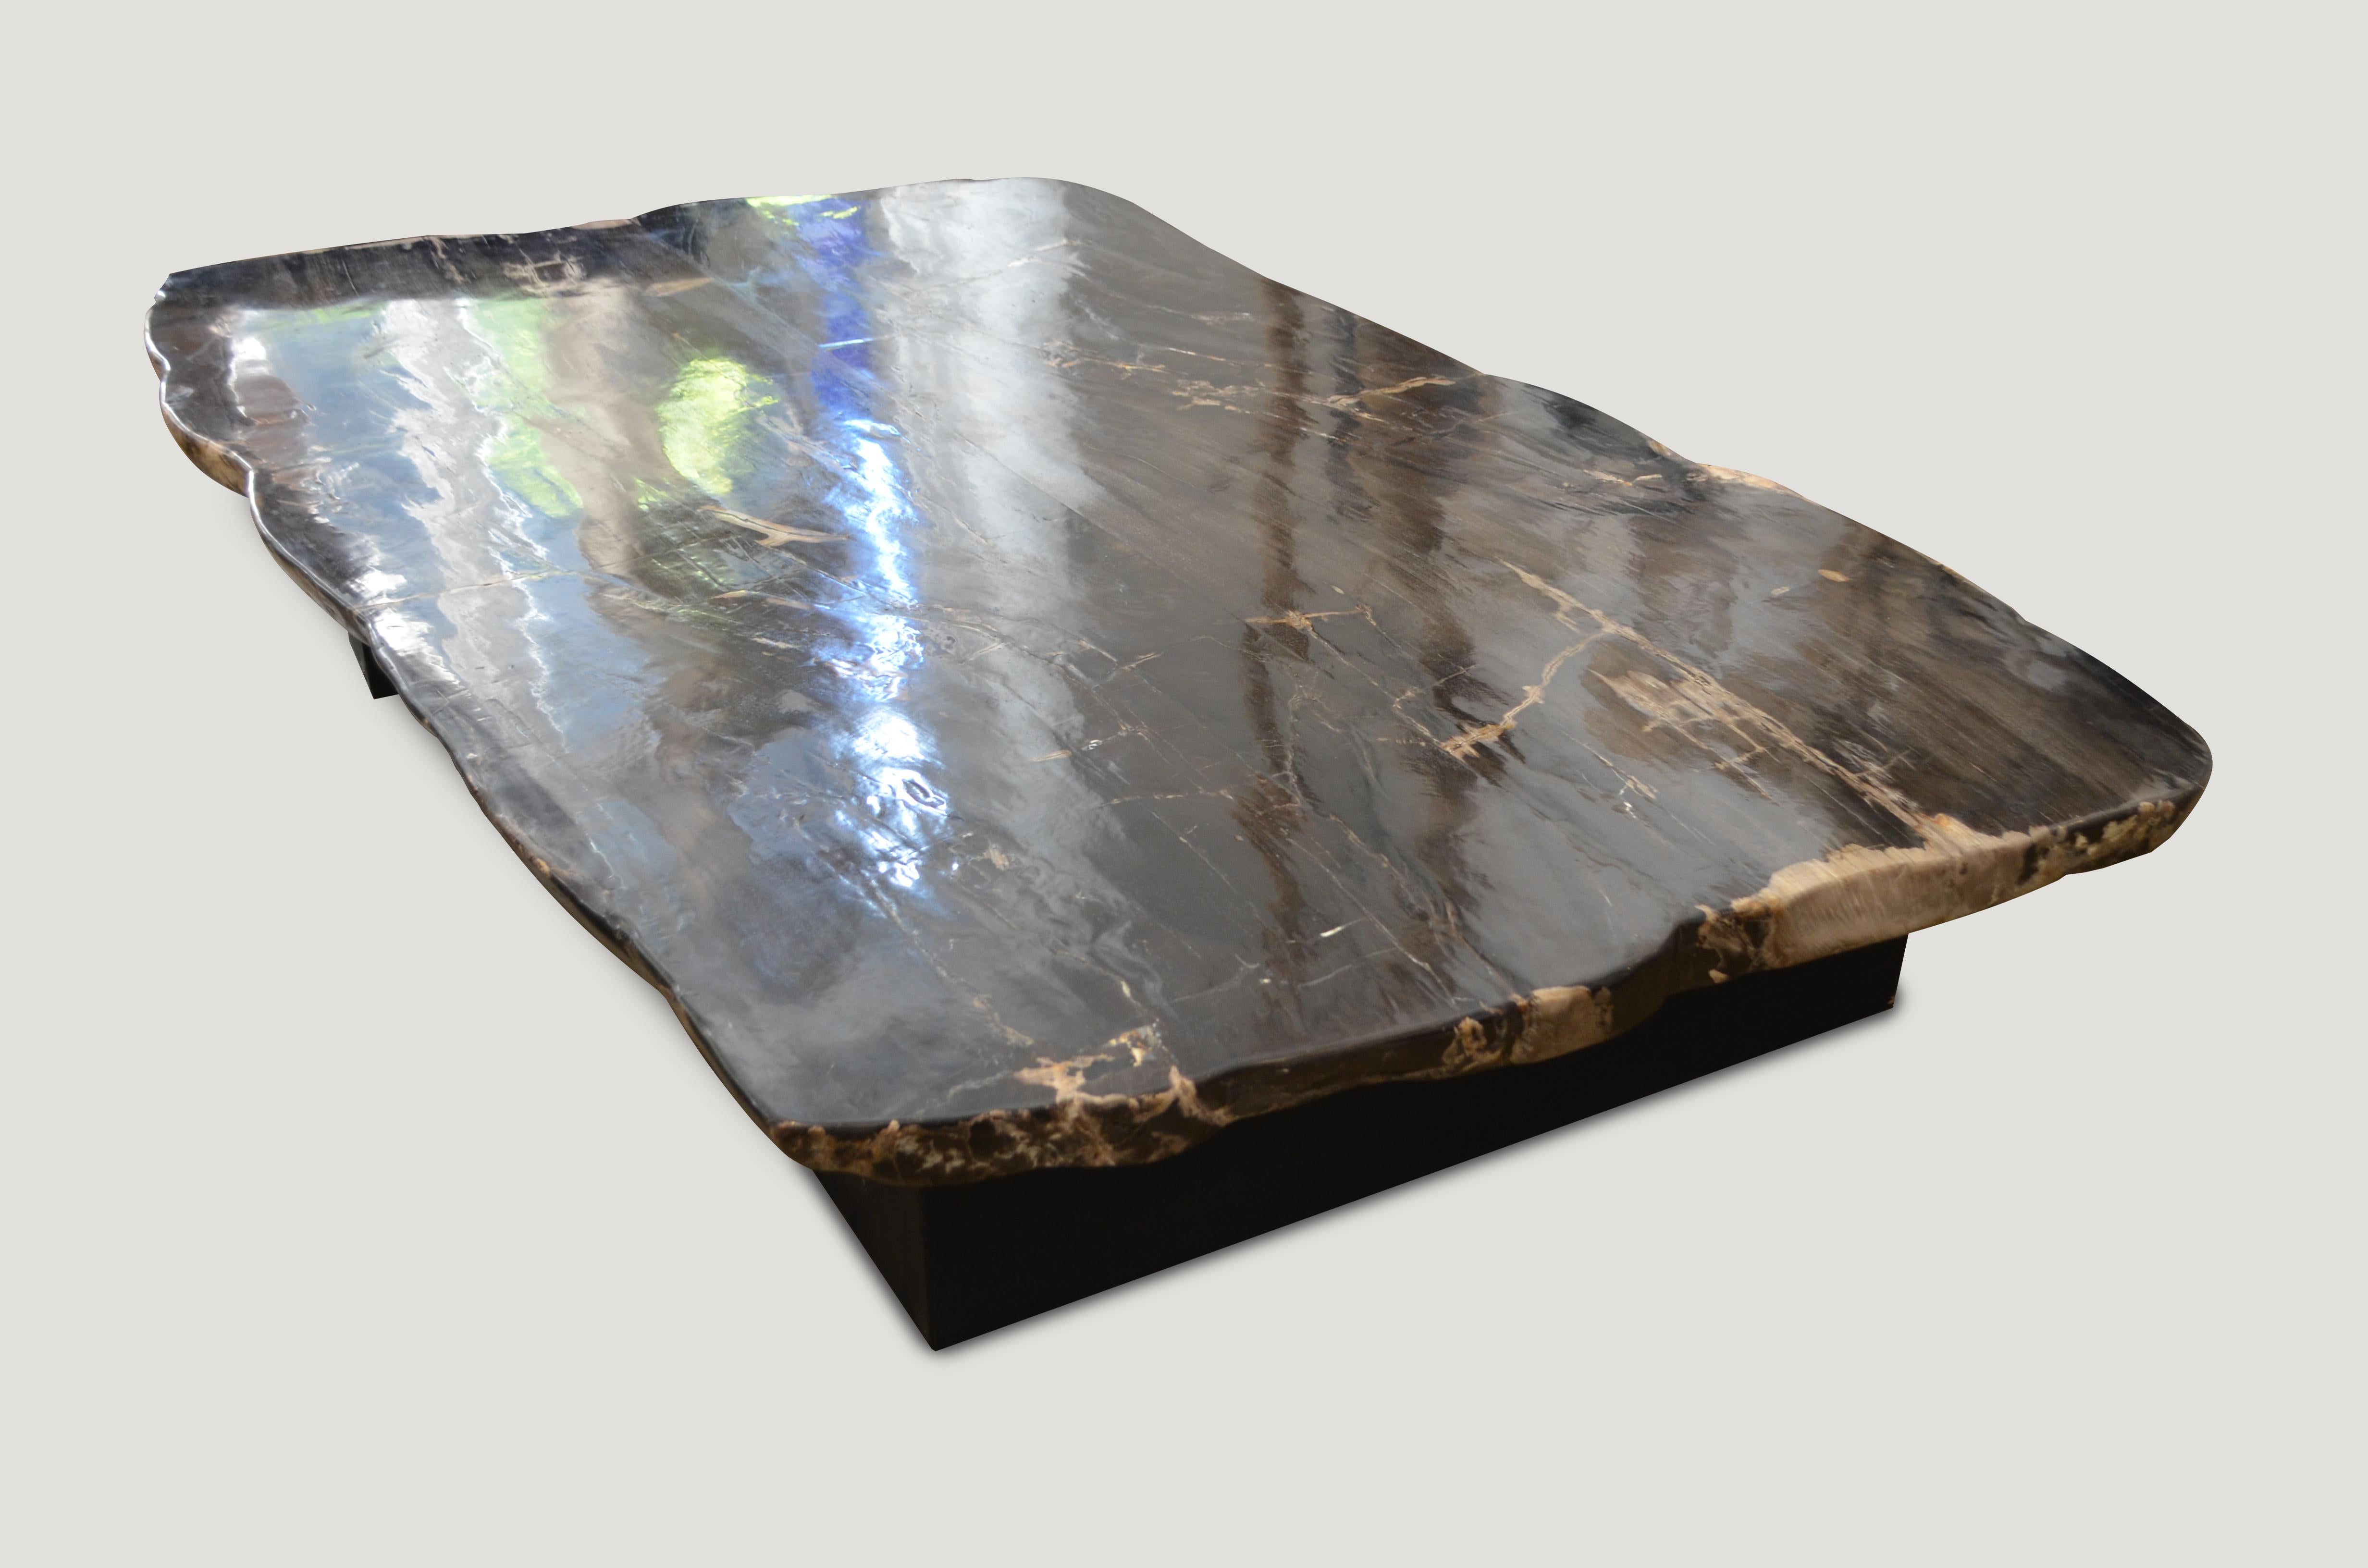 Impressive 3” thick petrified wood table top. Shown as a coffee table however this can also be a dining table or counter top. Please inquire. Two pieces from the same log joined for incredible width of 54″. It’s rare to find a piece this thick and